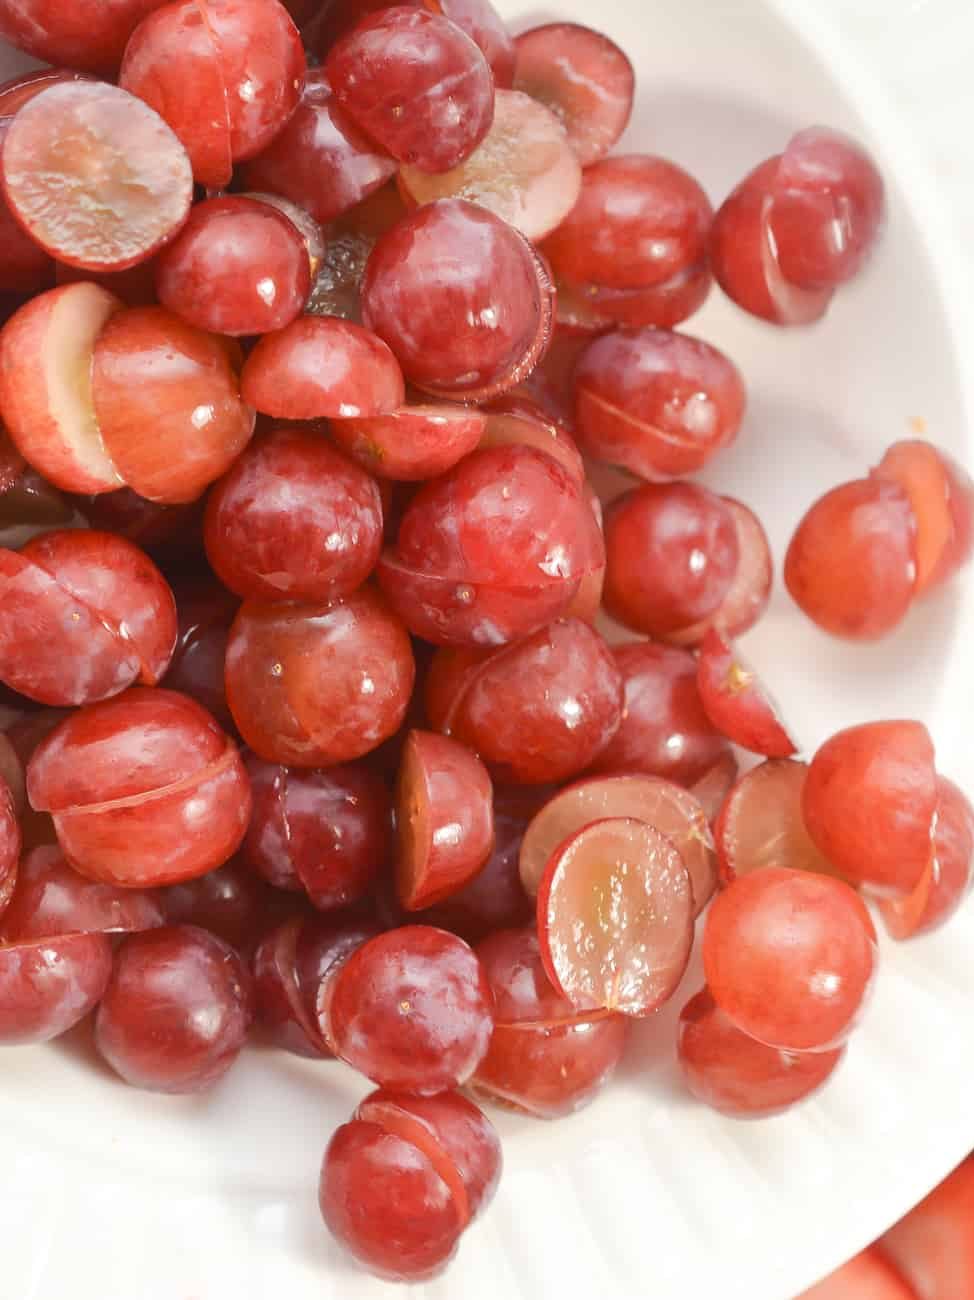 add 1 bunch of red grapes cut in half.